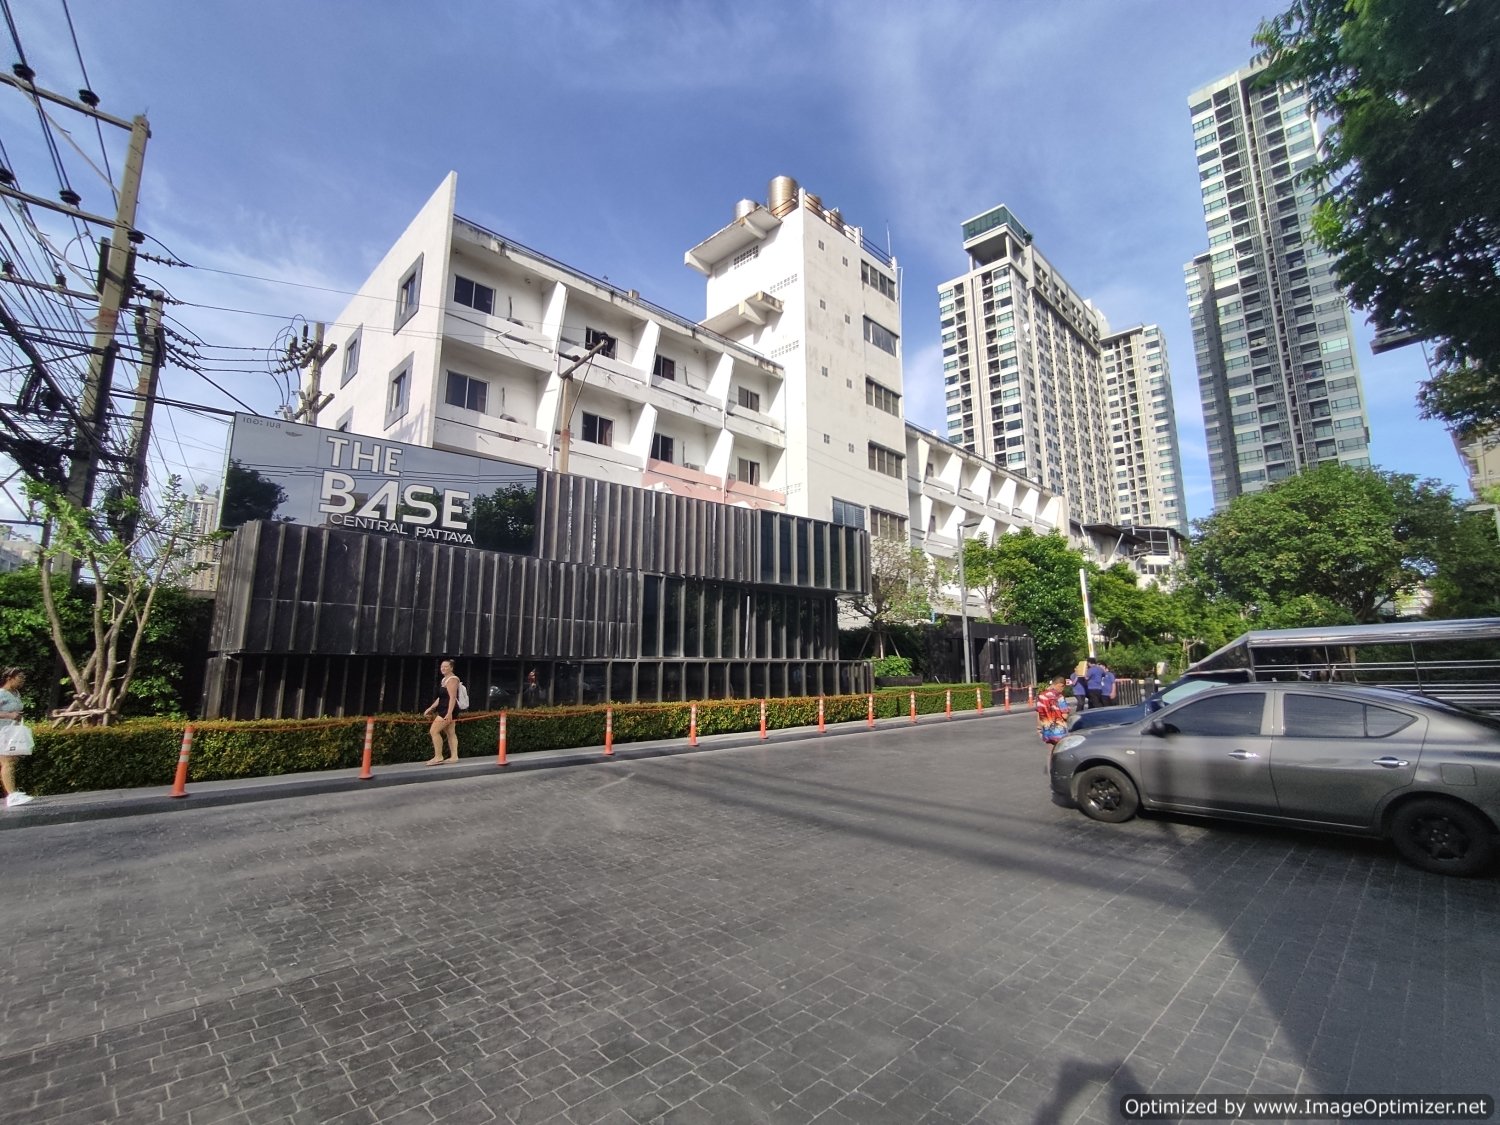 Condo for sale The Base Central Pattaya , 1 bedroom , 29.77 sq m. , 4th floor, opposite Central Festival Pattaya !!